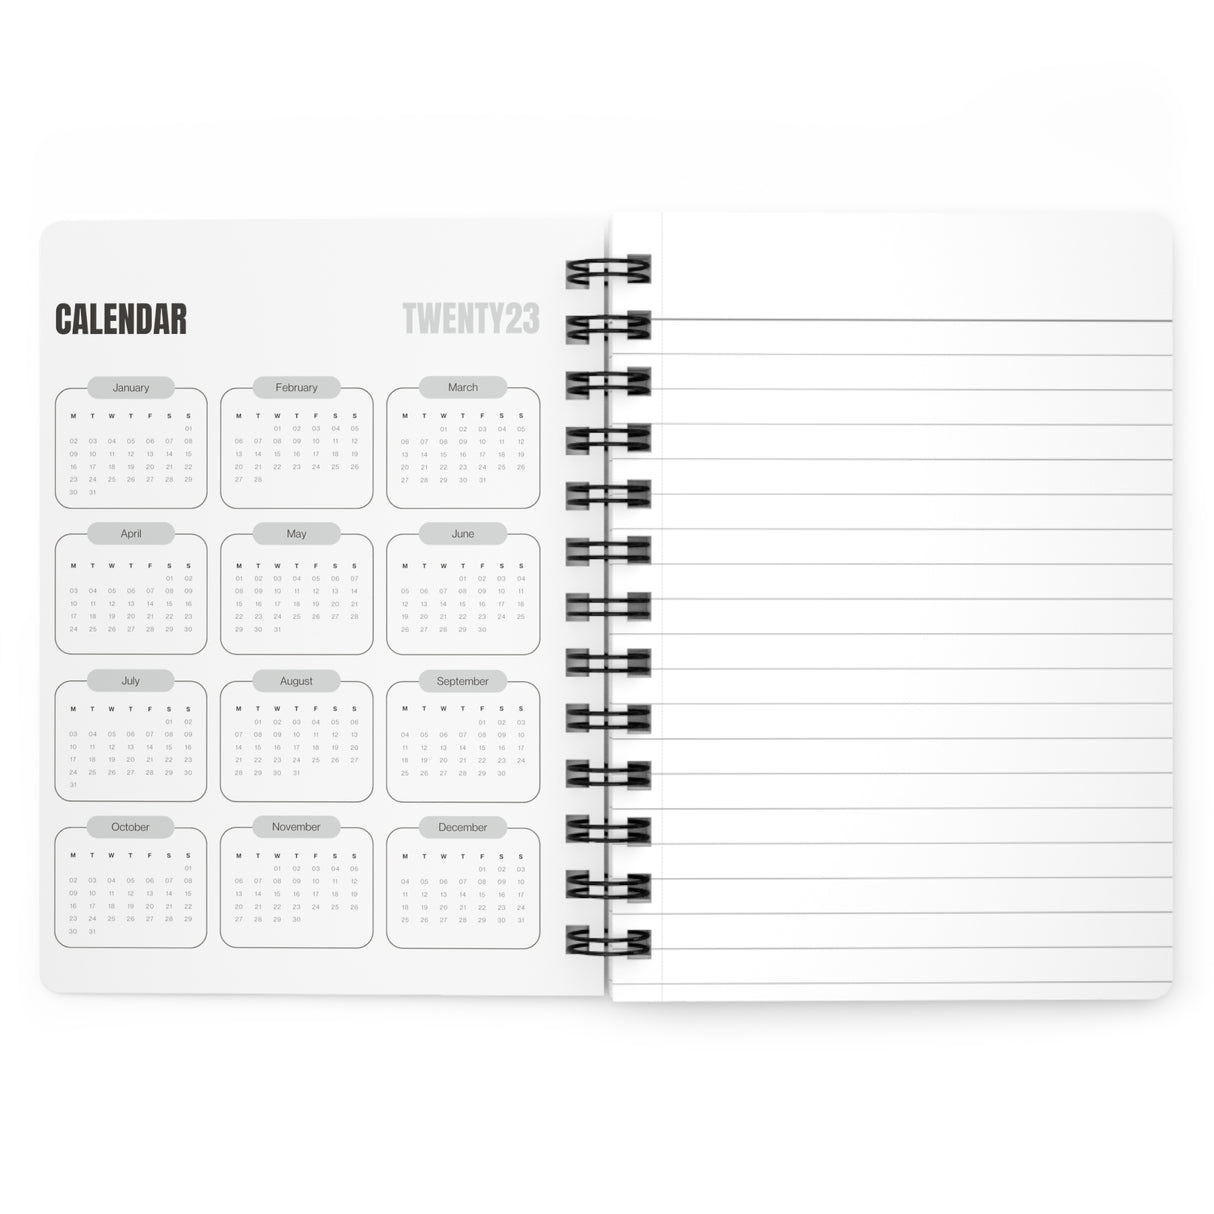 Flossy Pepper Spiral Bound Notebooks and Journals with 2023-2024 Year-at-a-Glance Calendar